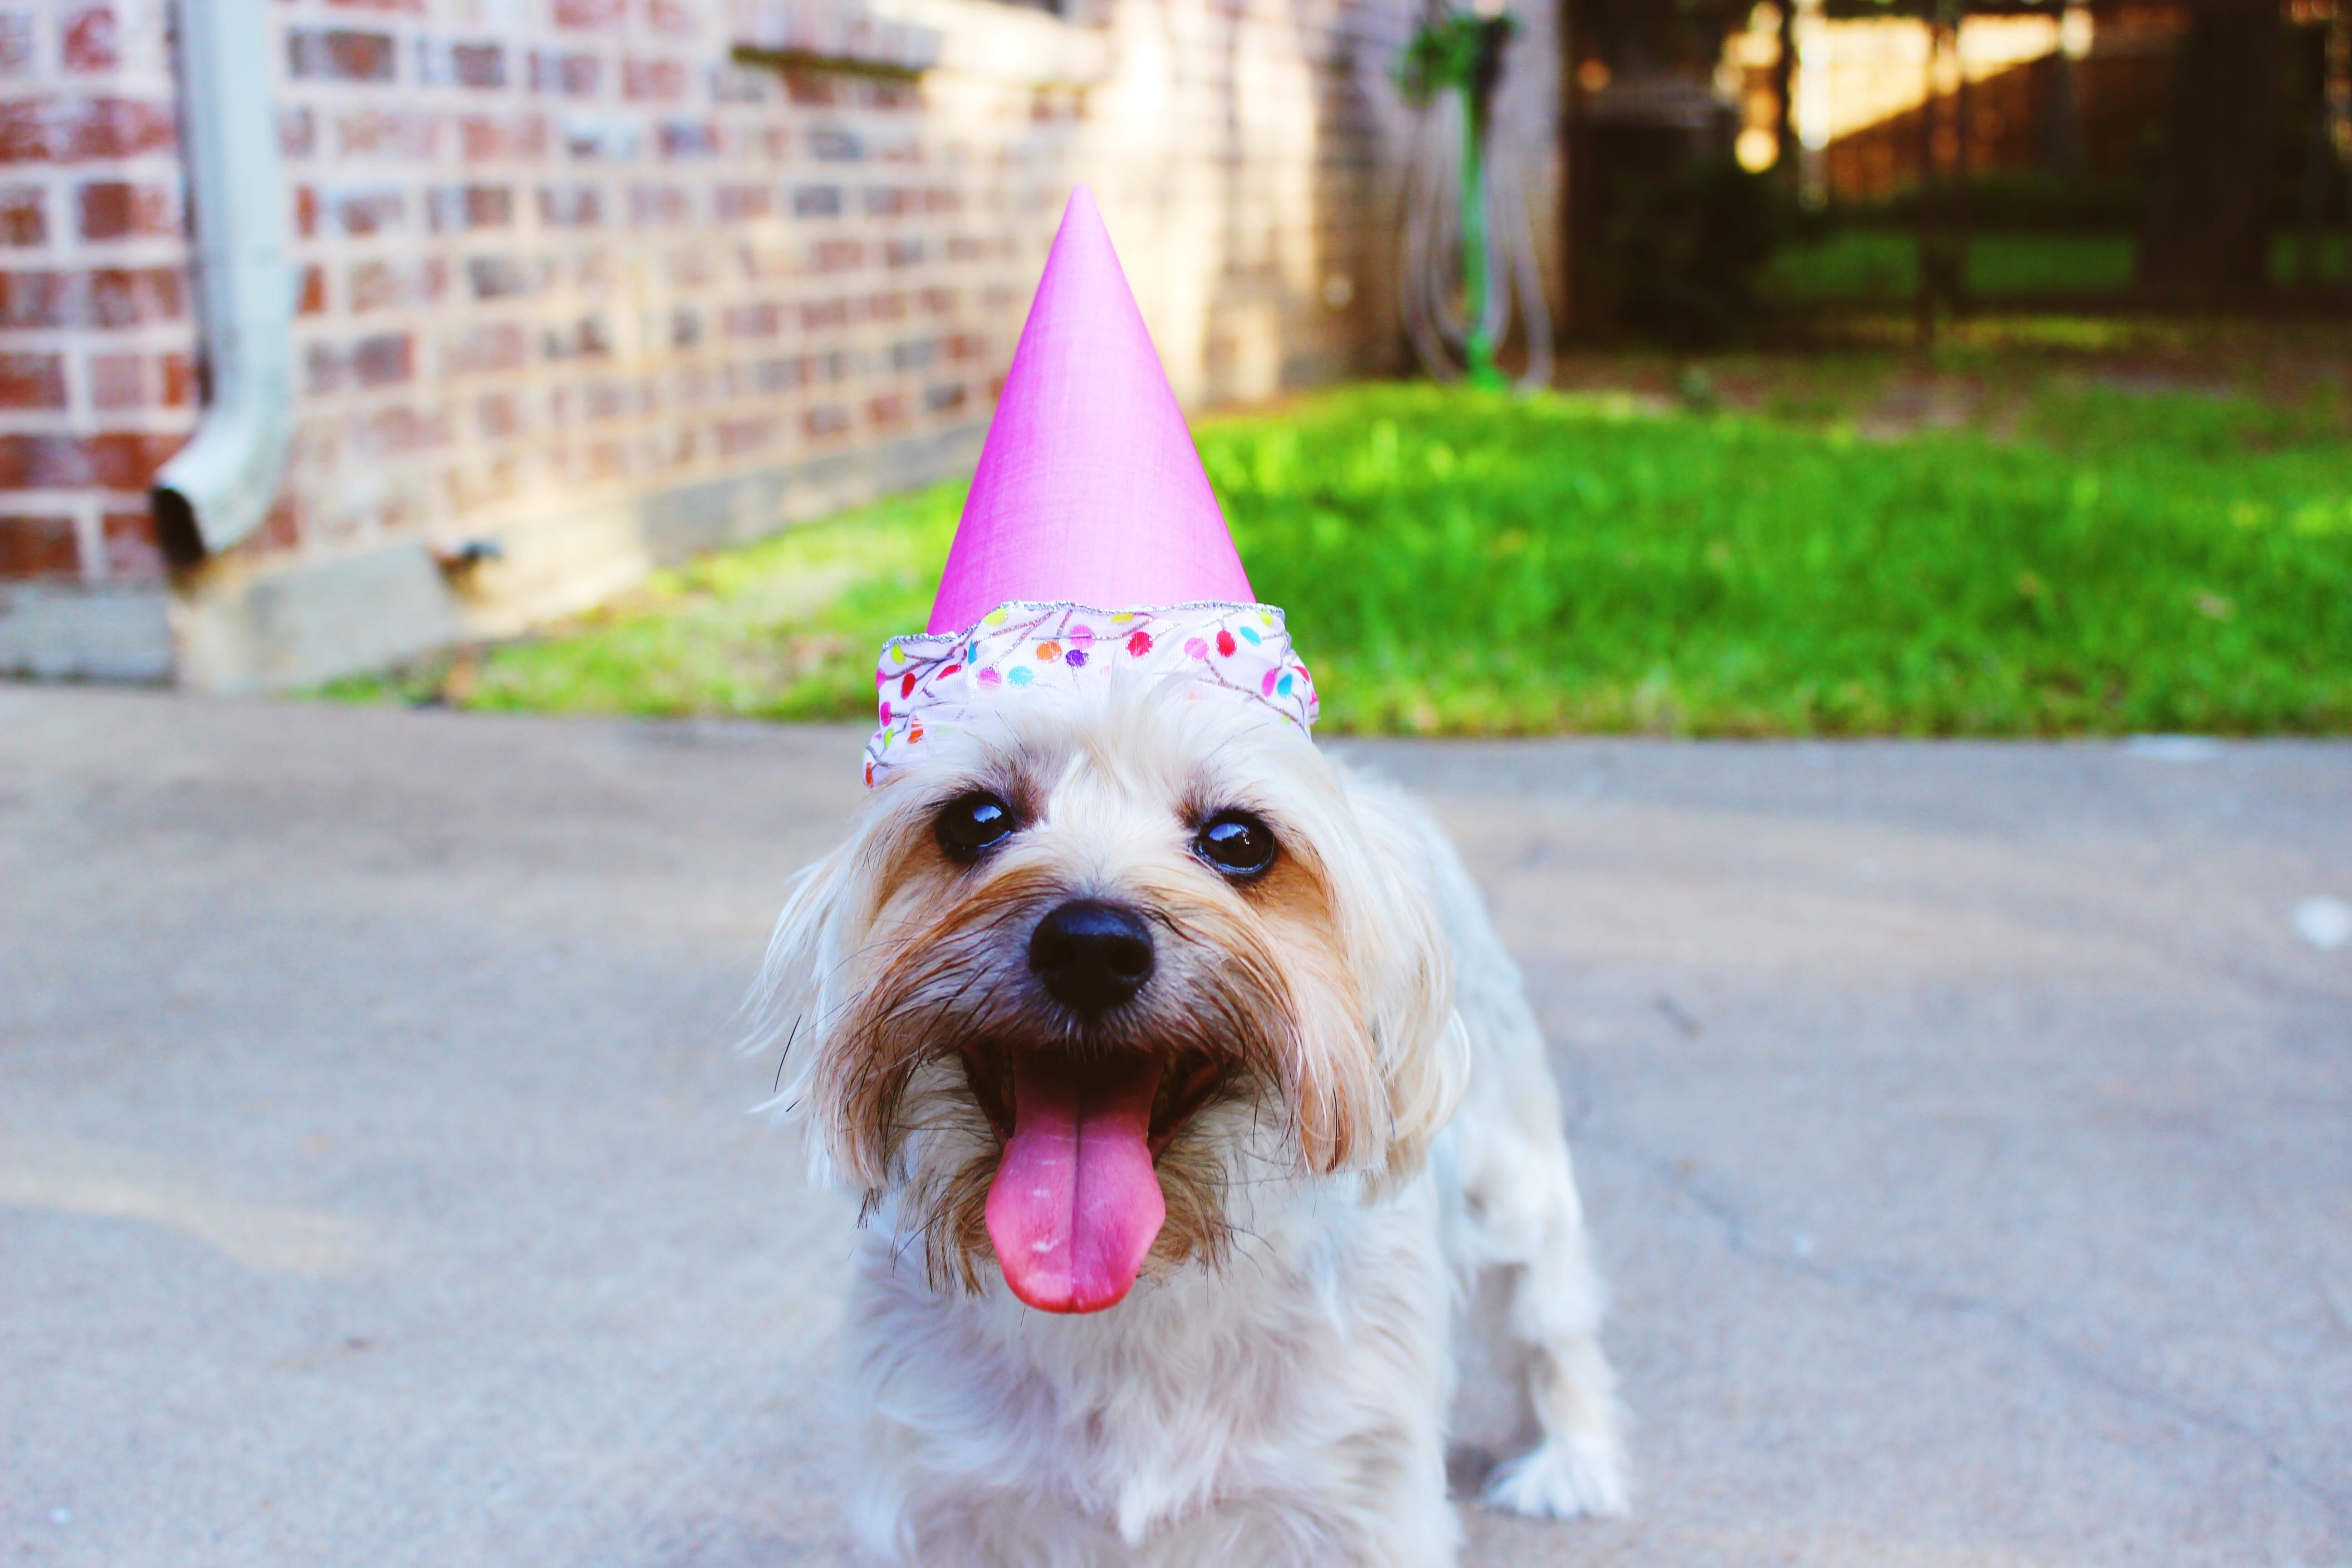 Dog in party hat at aged care home